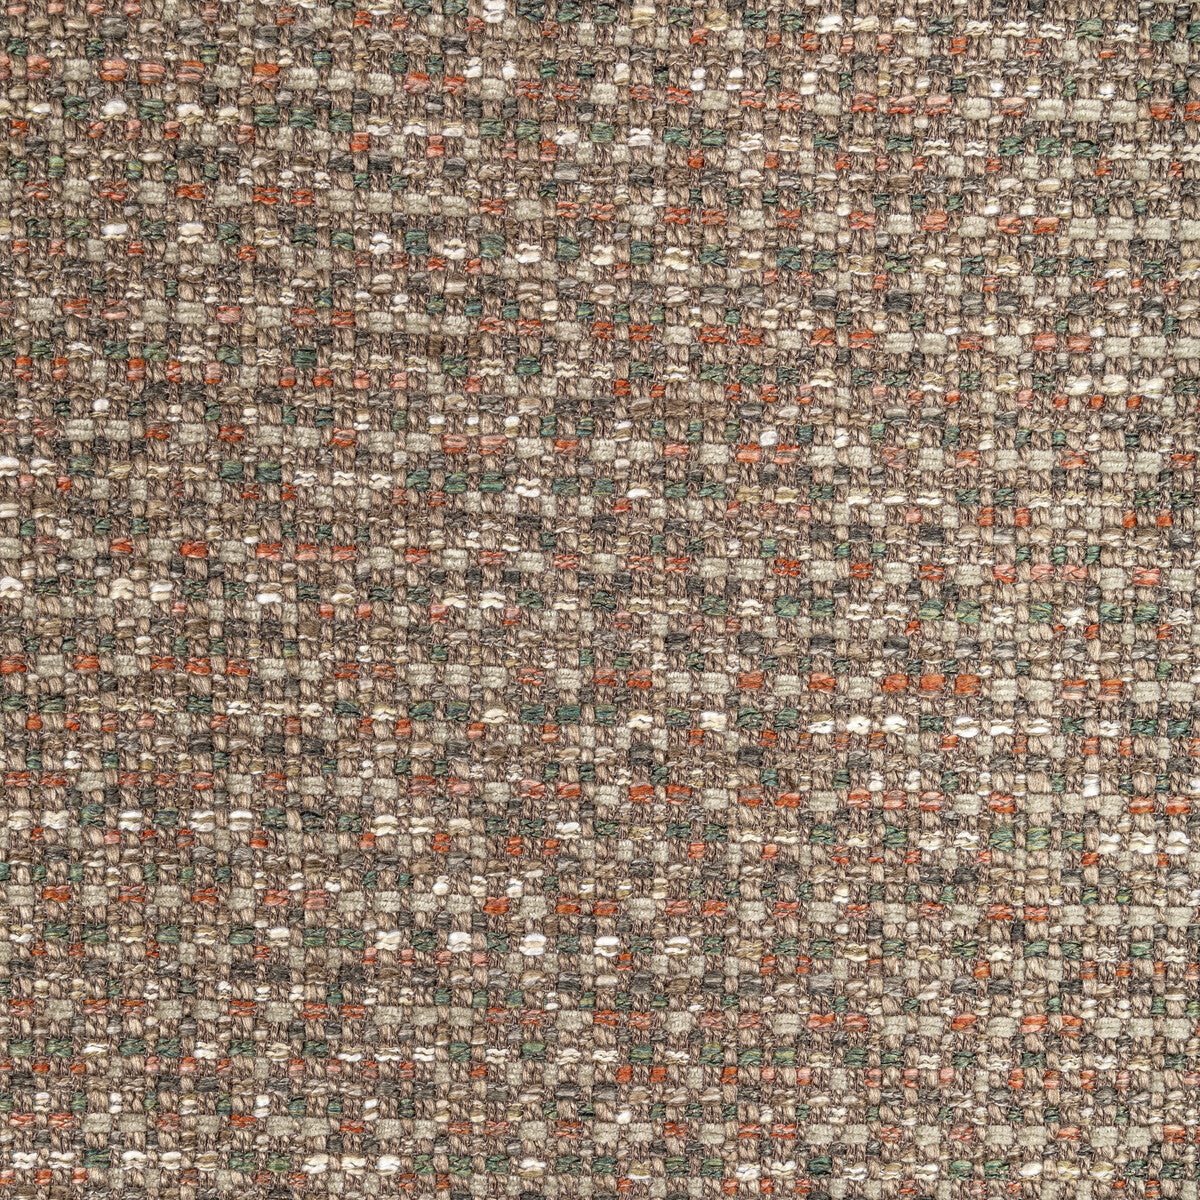 Remo fabric in mesa color - pattern 36324.612.0 - by Kravet Contract